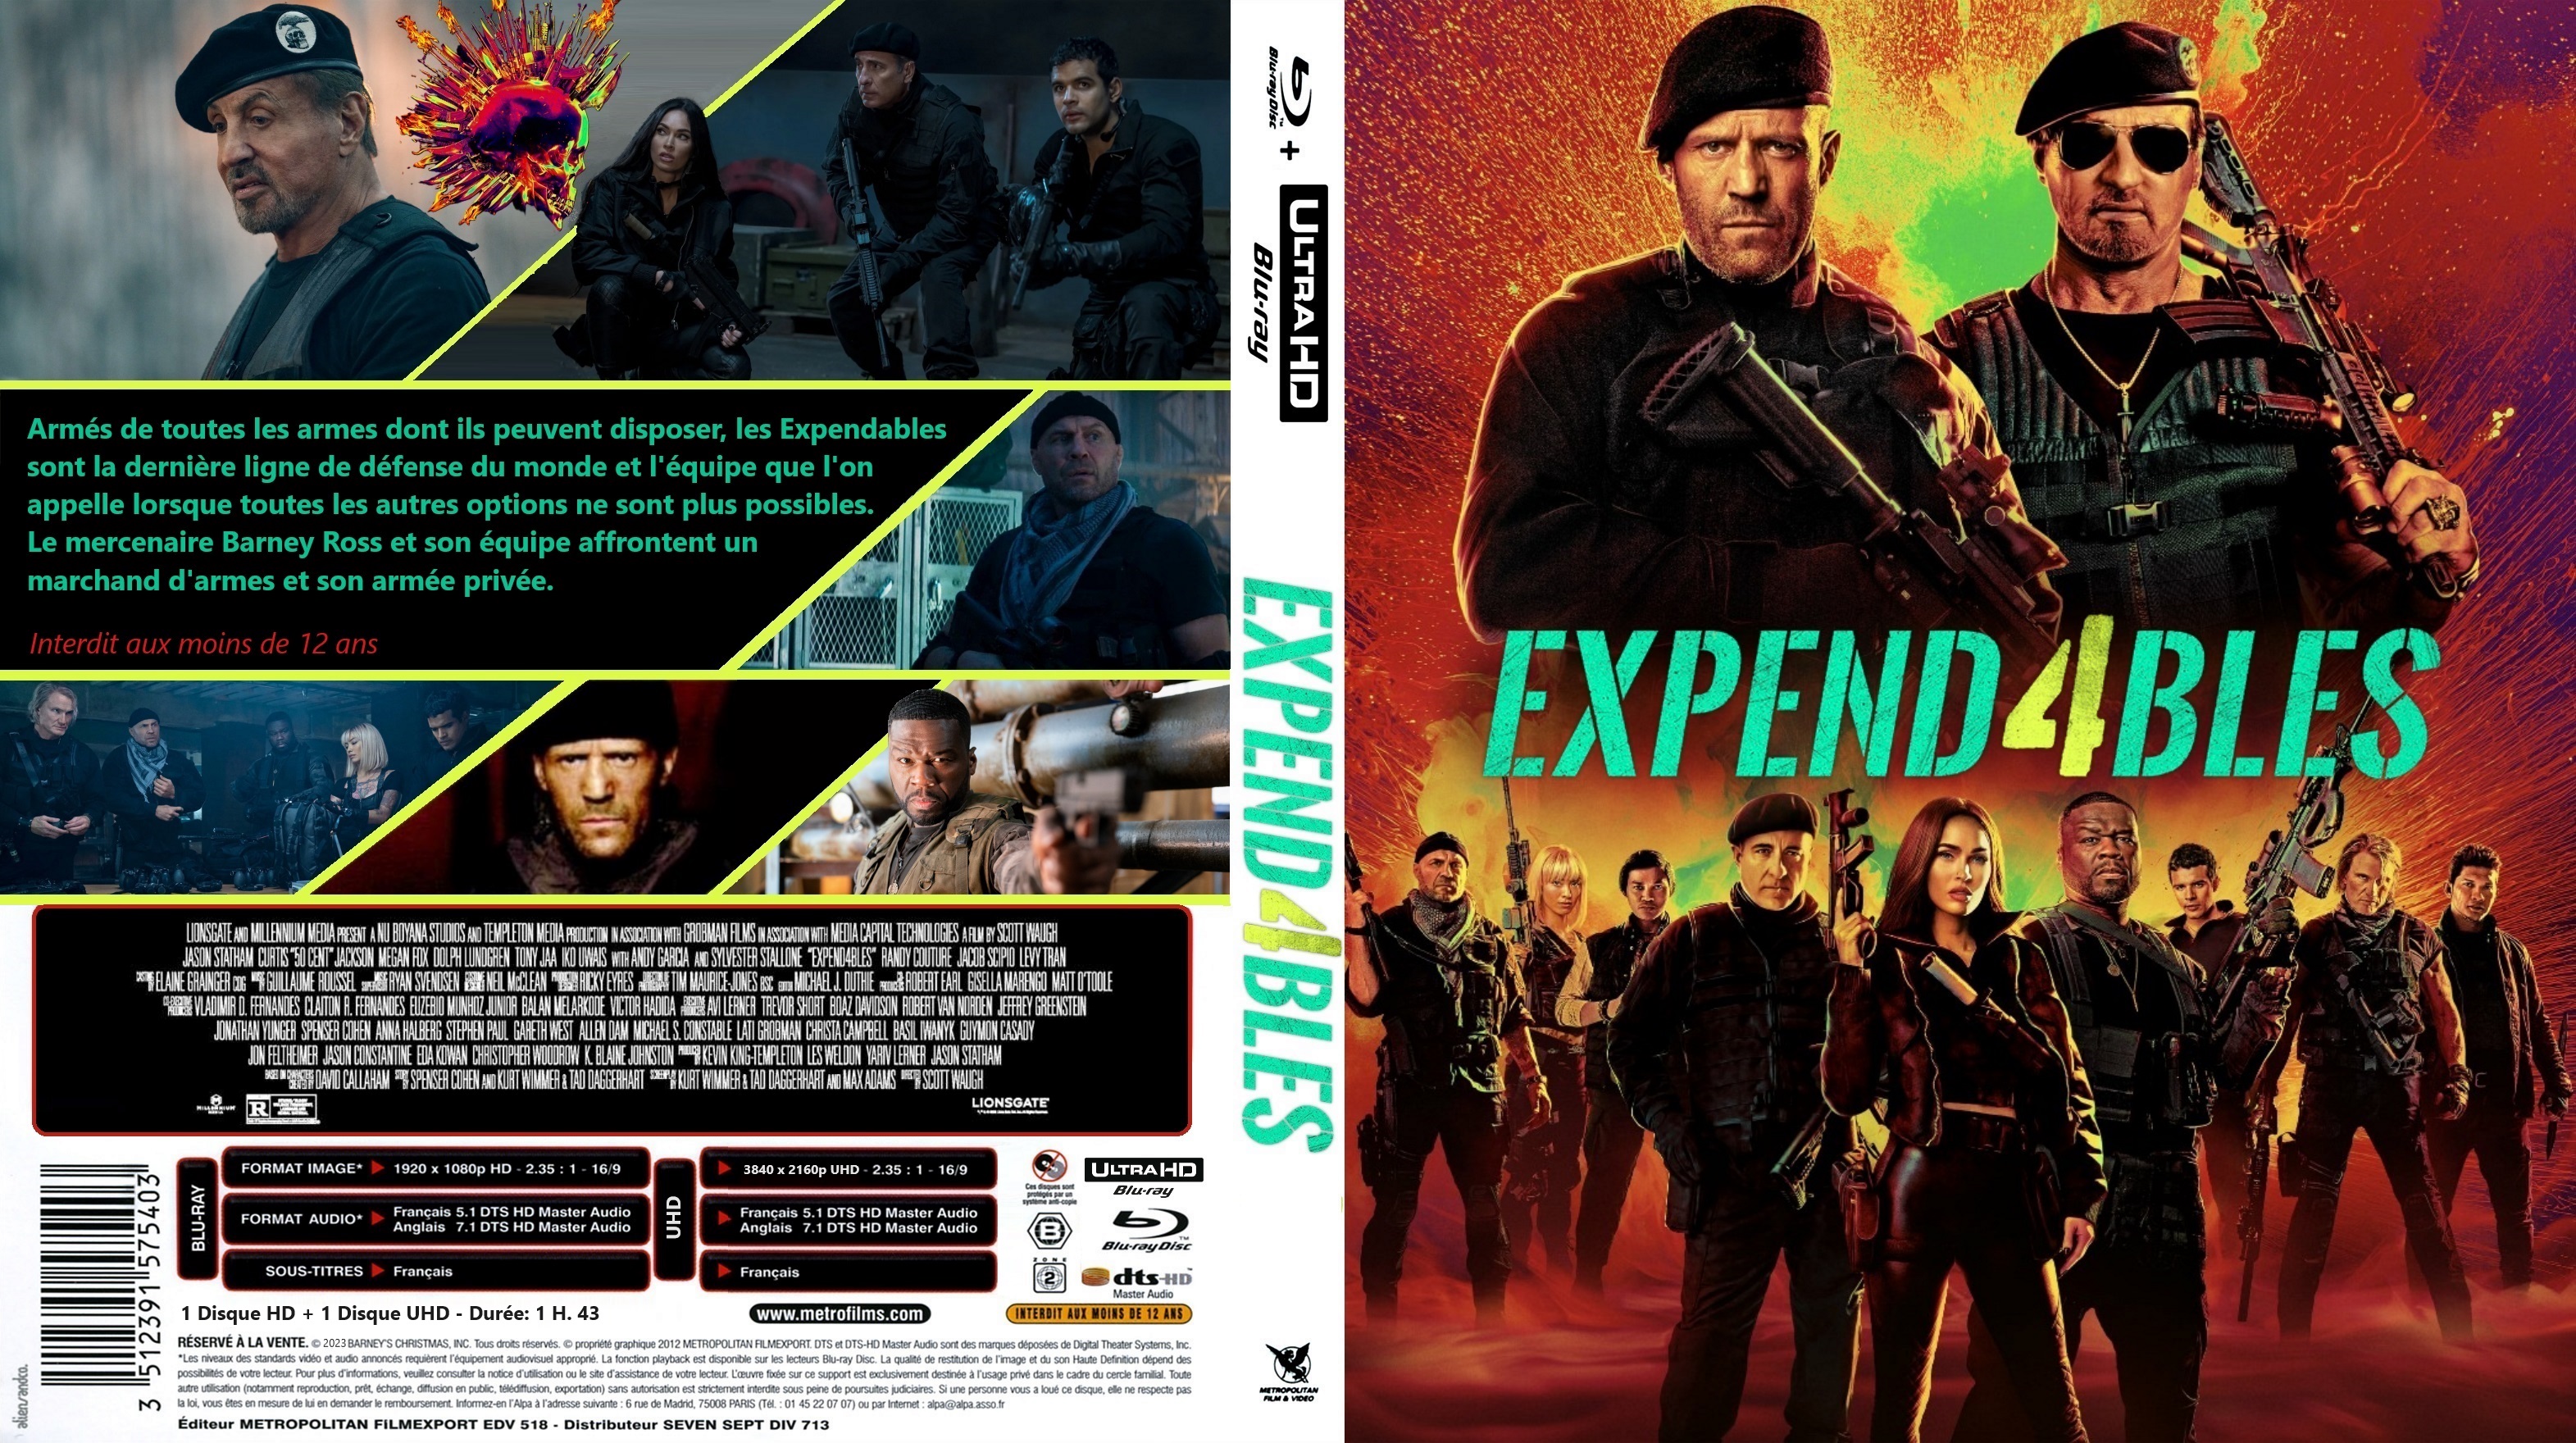 Jaquette DVD Expendables 4 custom 4K (BLU-RAY)